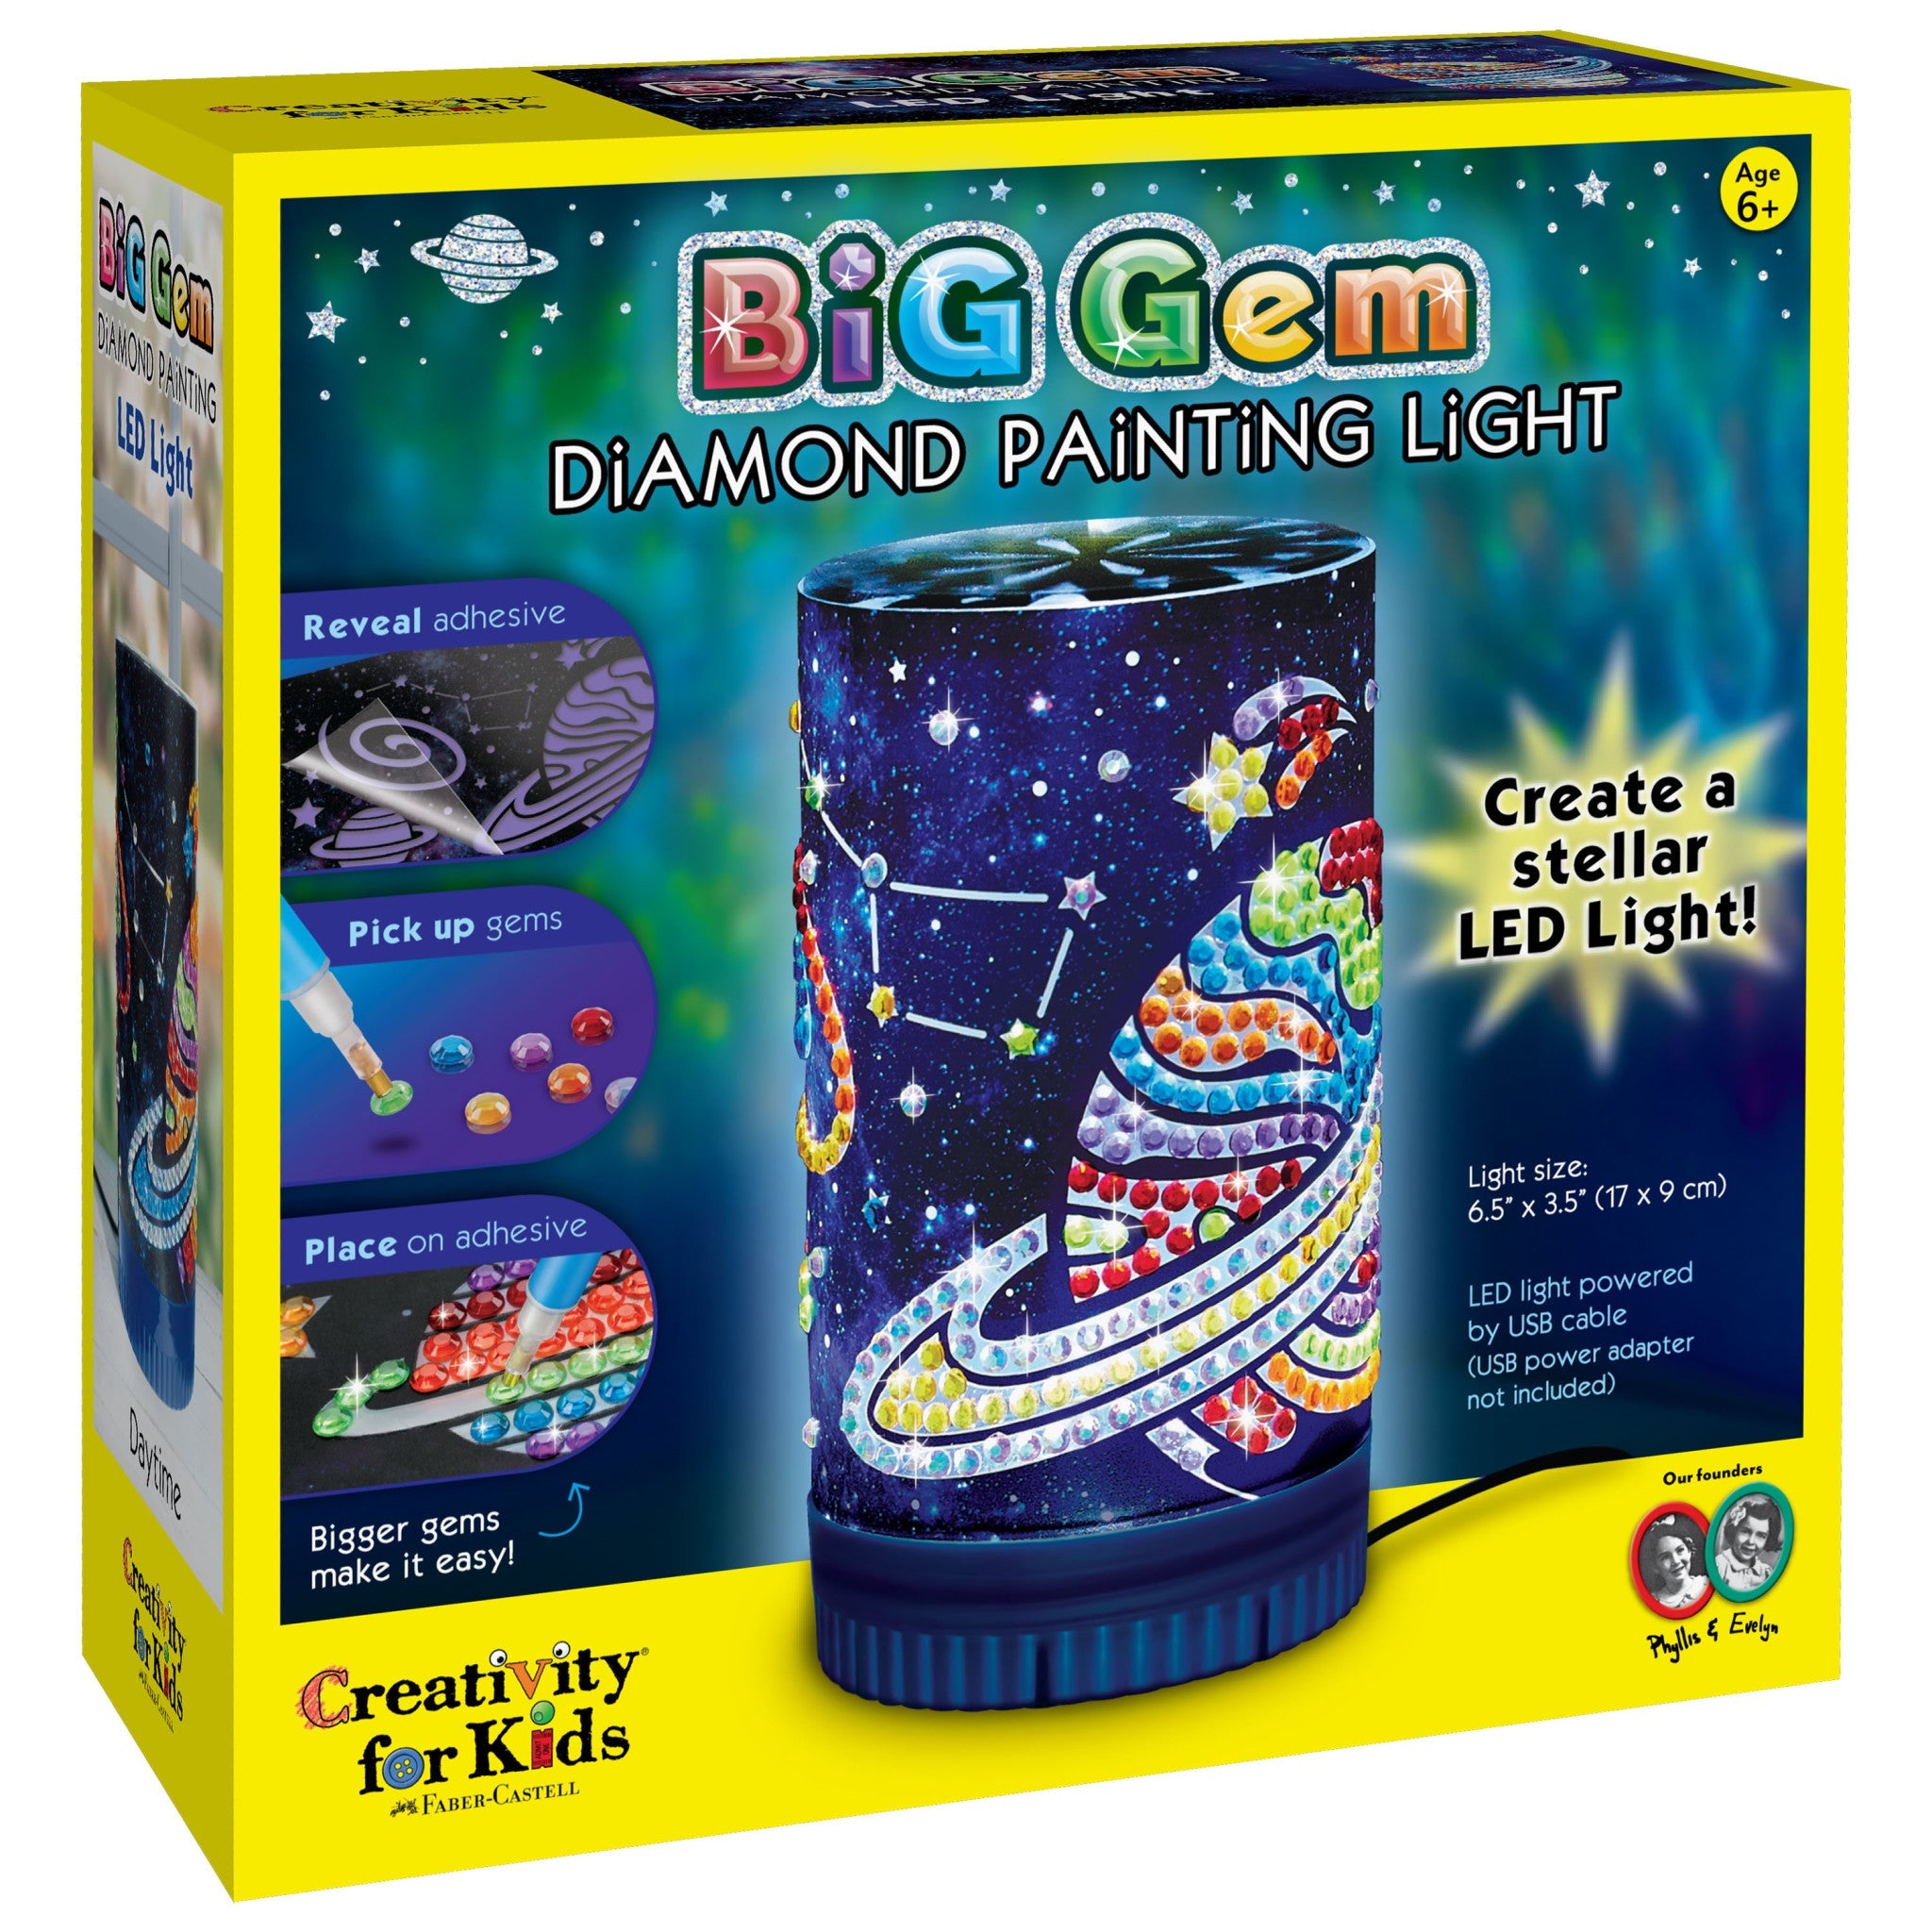 Creativity for Kids Big Gem Diamond Painting Kits: Magical Stickers and  Suncatcher DIY Kit - Diamond Art for Kids, Unicorn Gifts for Girls Ages 6-8+